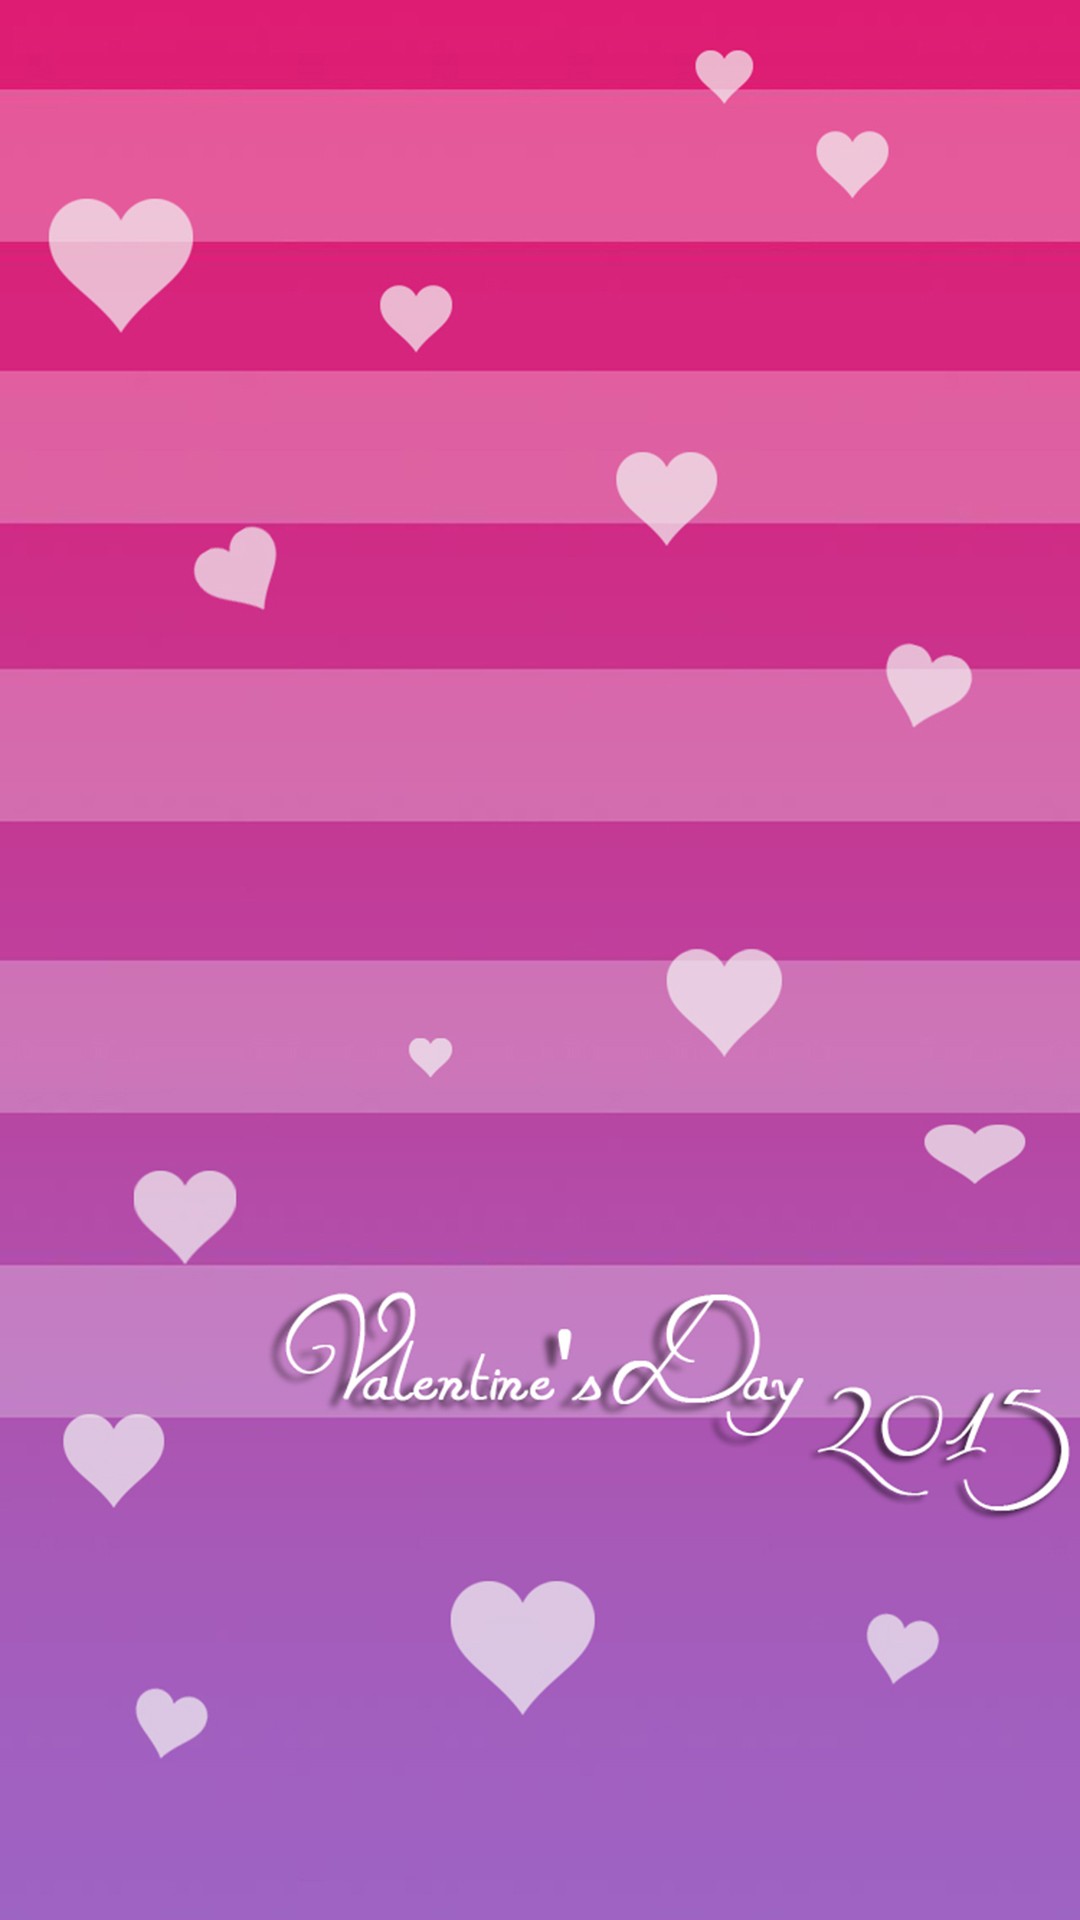 Wallpaper Android Happy Valentines Day Images with HD resolution 1080x1920